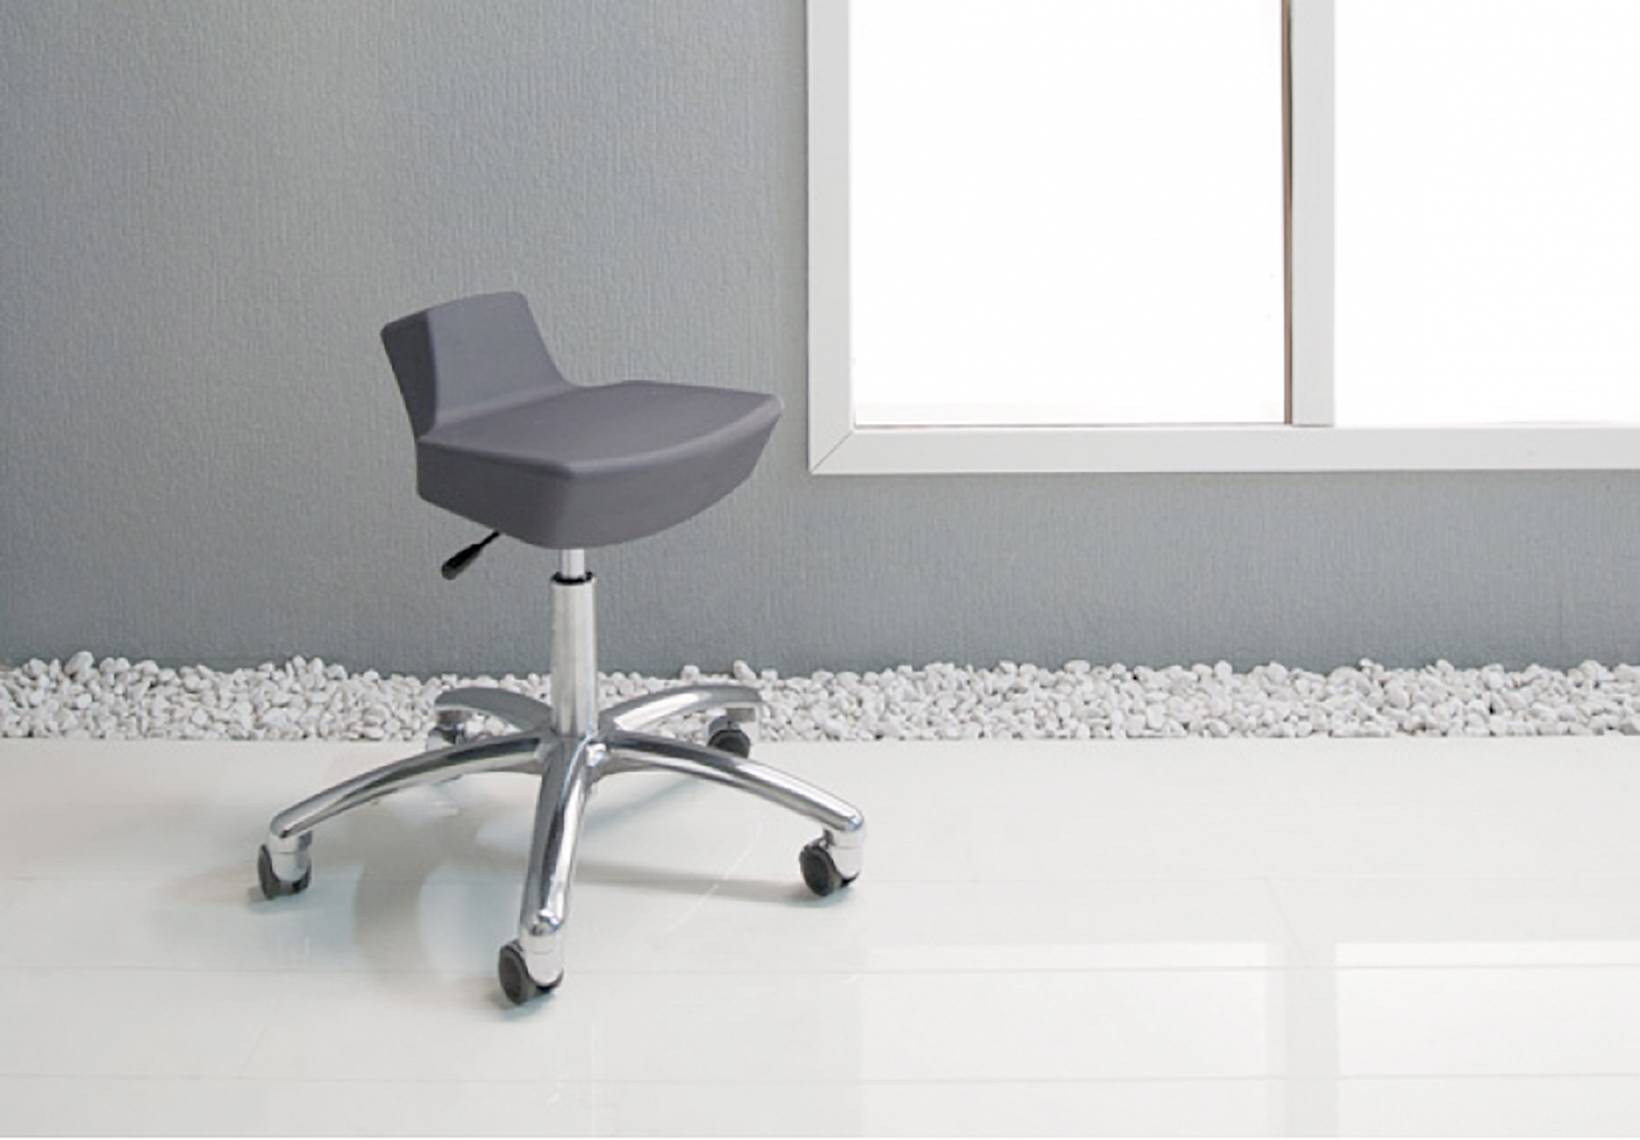 Therapist Stools | Spa Vision | Global Leading Spa Equipment Supplier